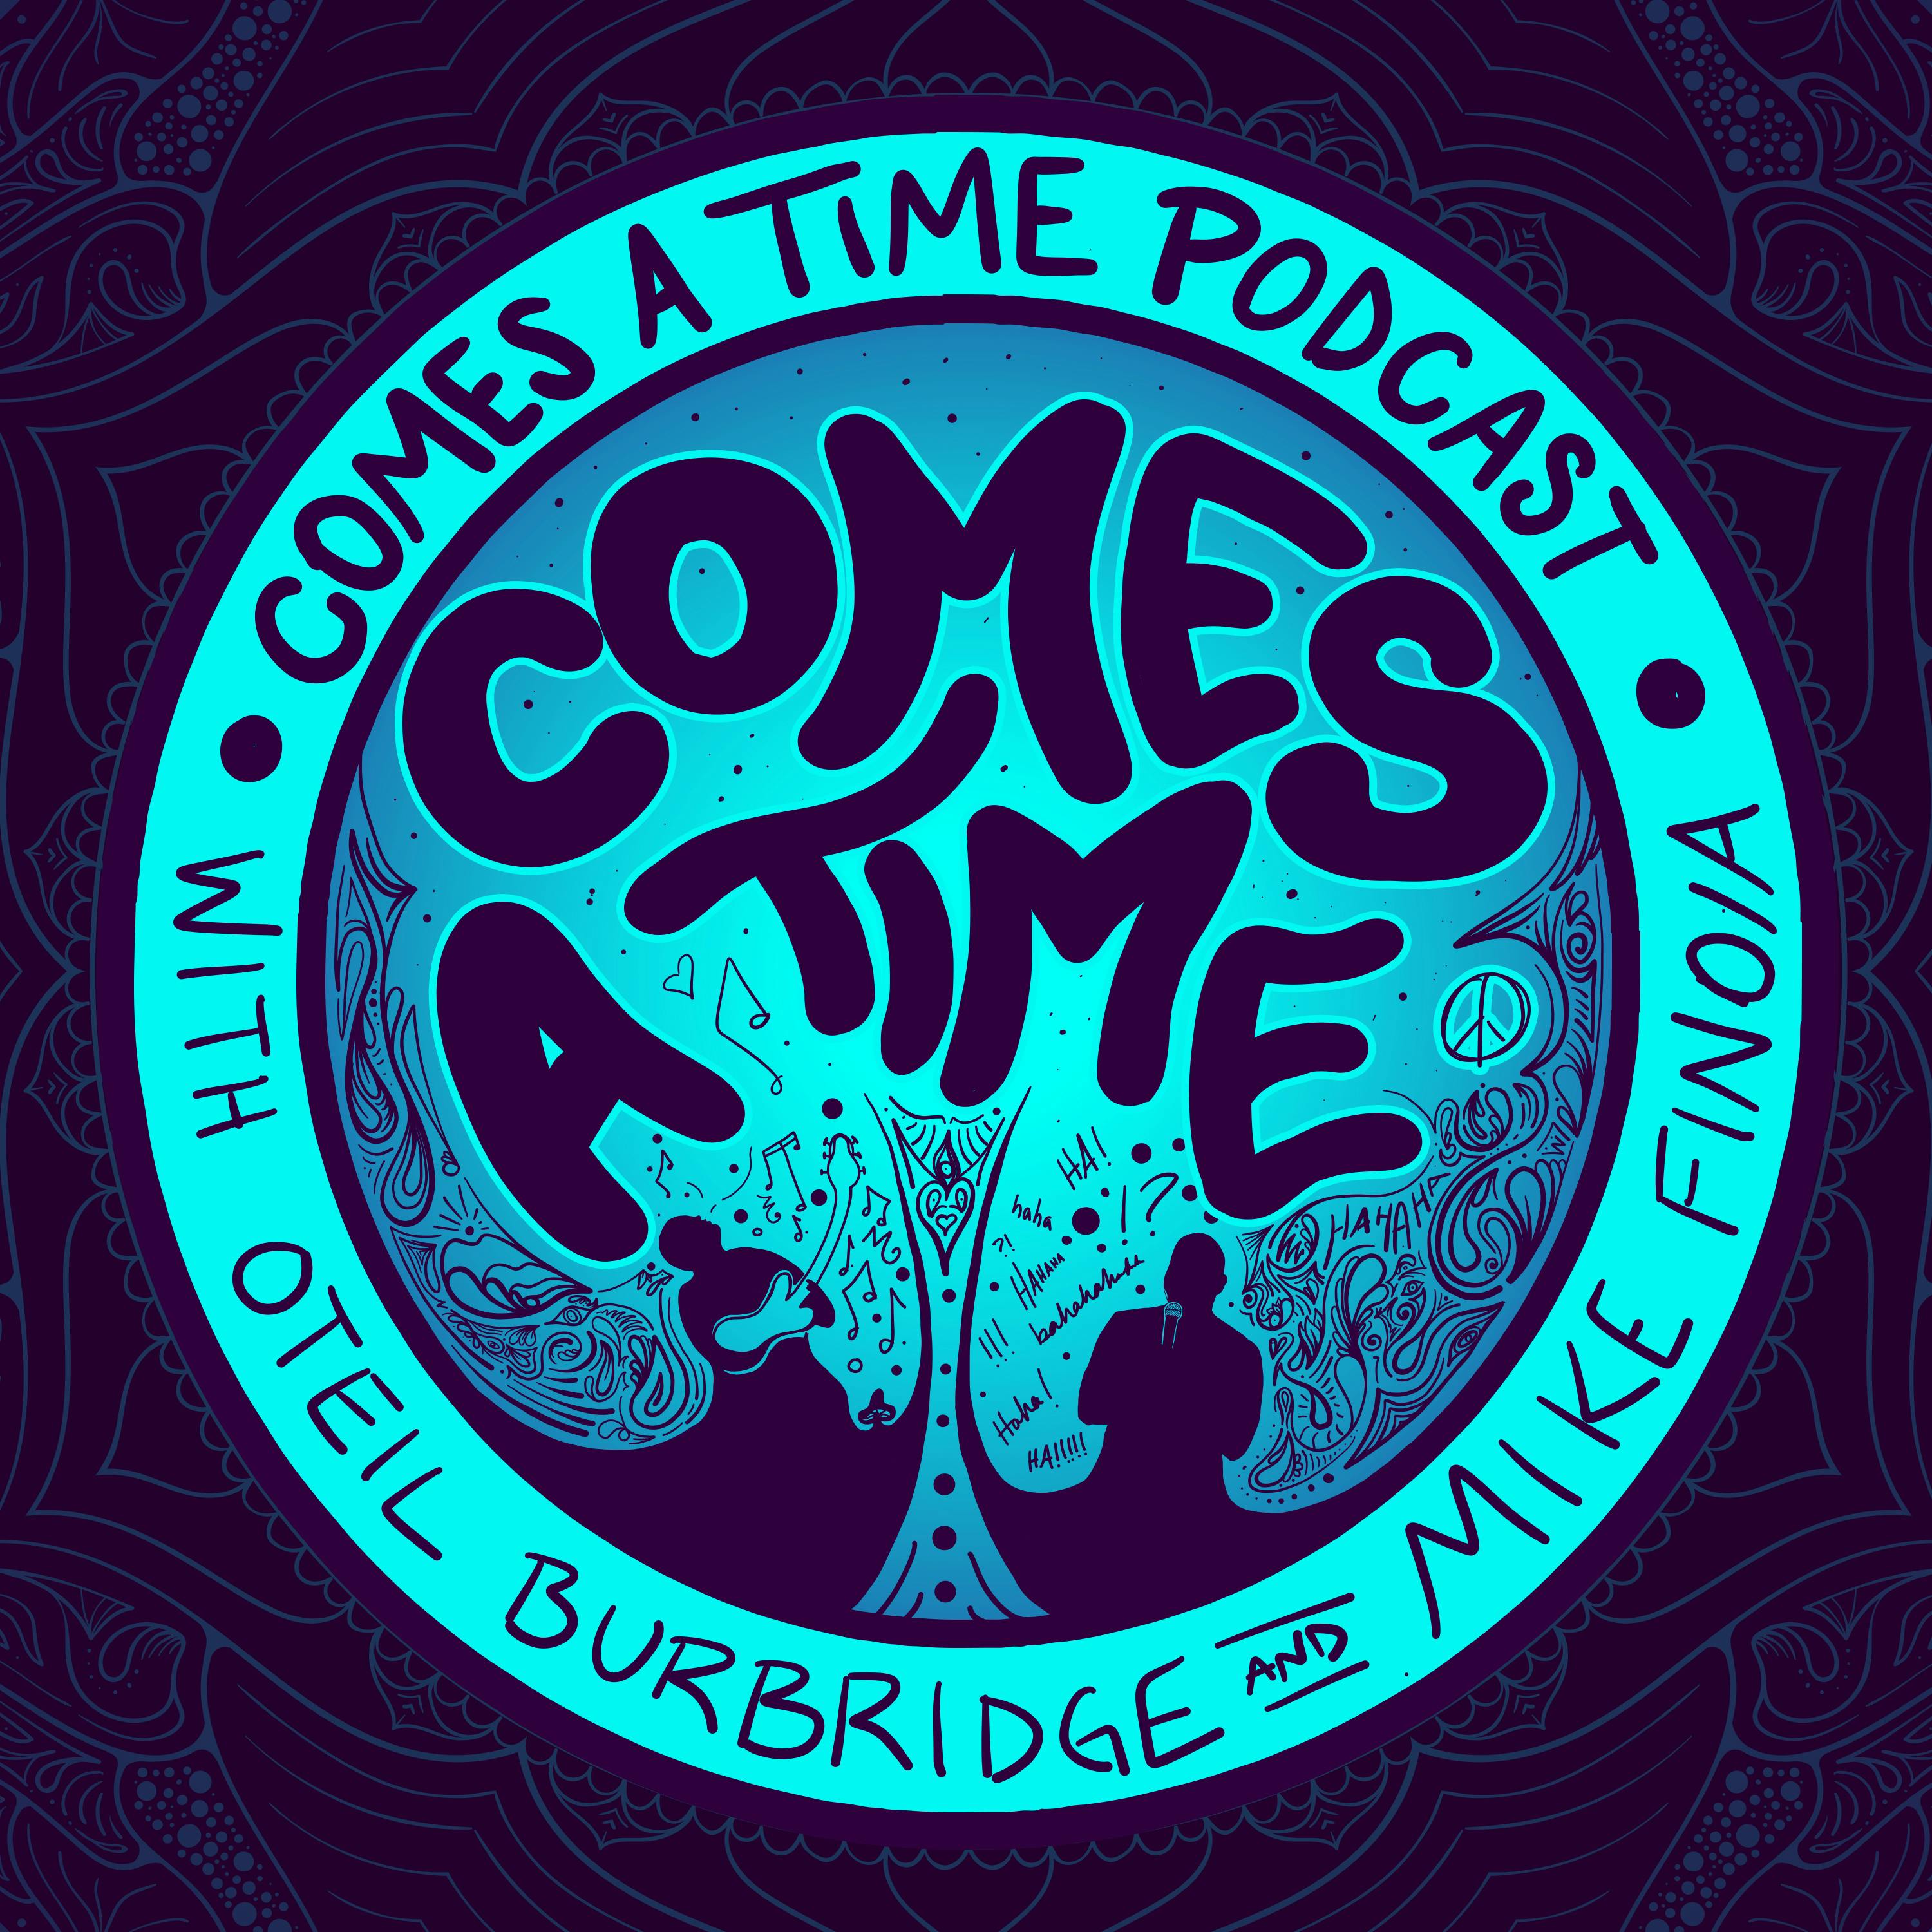 Comes A Time: The Art of Reinvention - Andrew Kline's Transition from Athlete to Entrepreneur